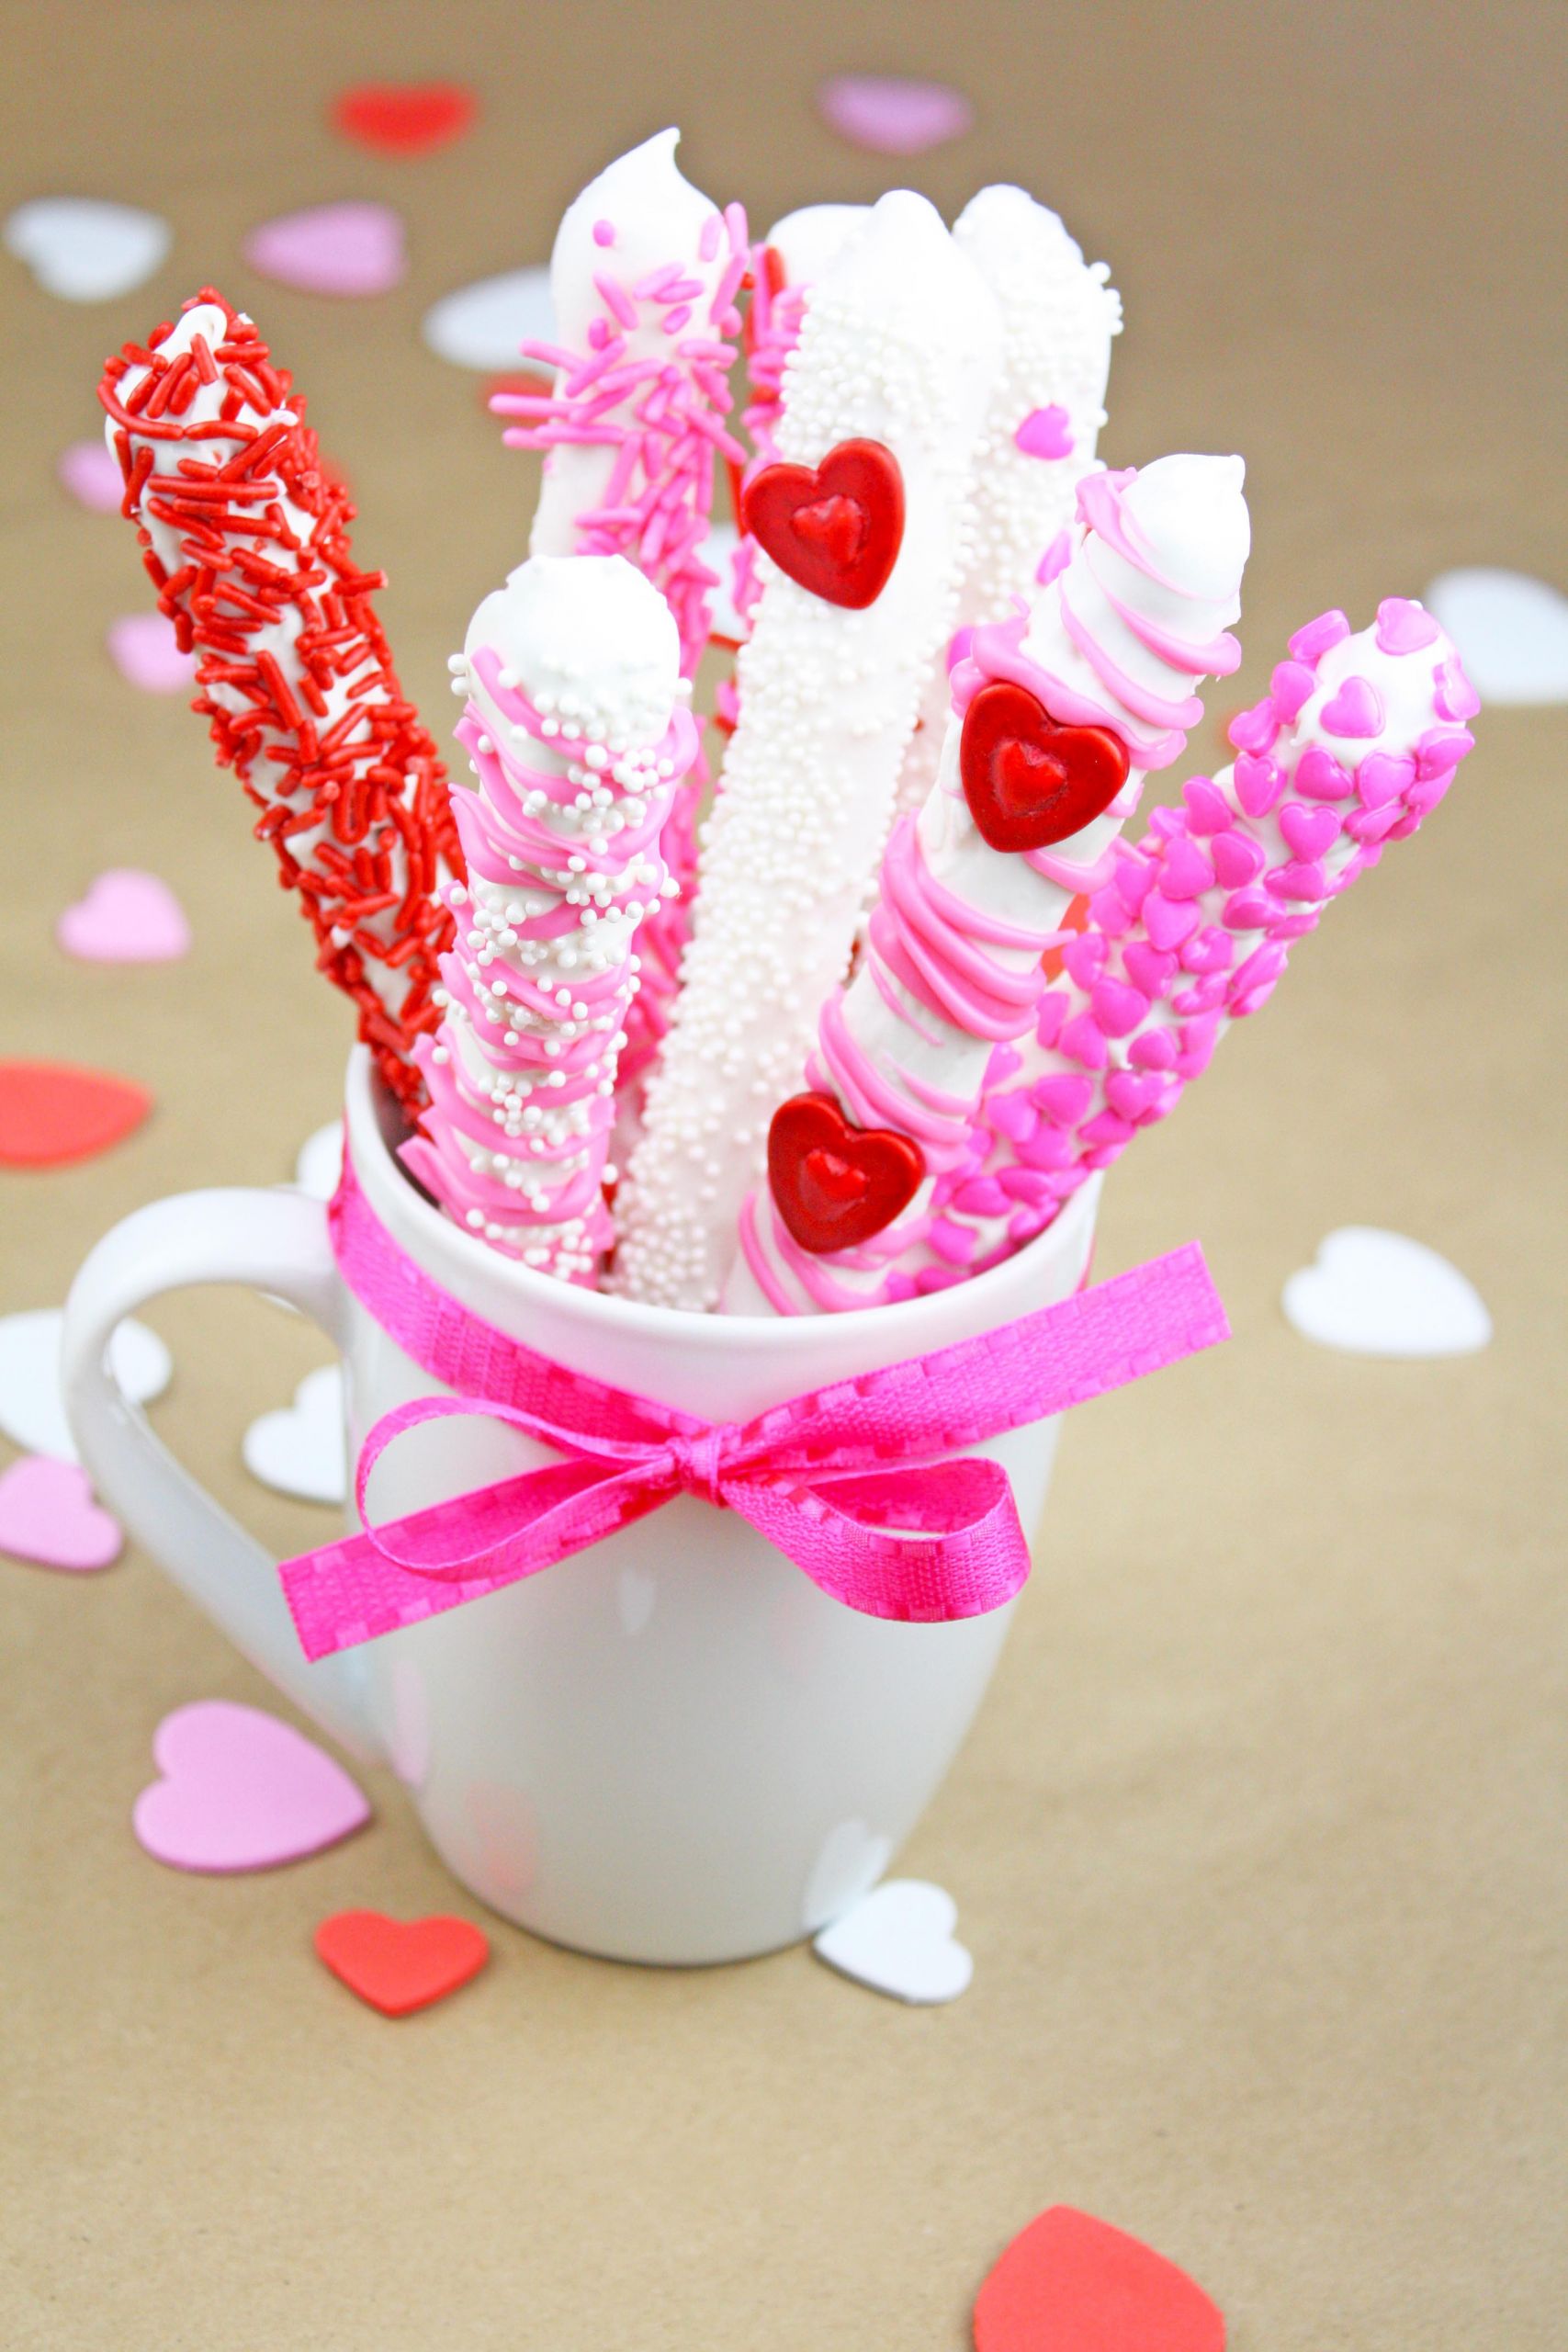 Chocolate Covered Pretzels For Valentines Day
 Valentine s Day Chocolate Covered Pretzels DIY